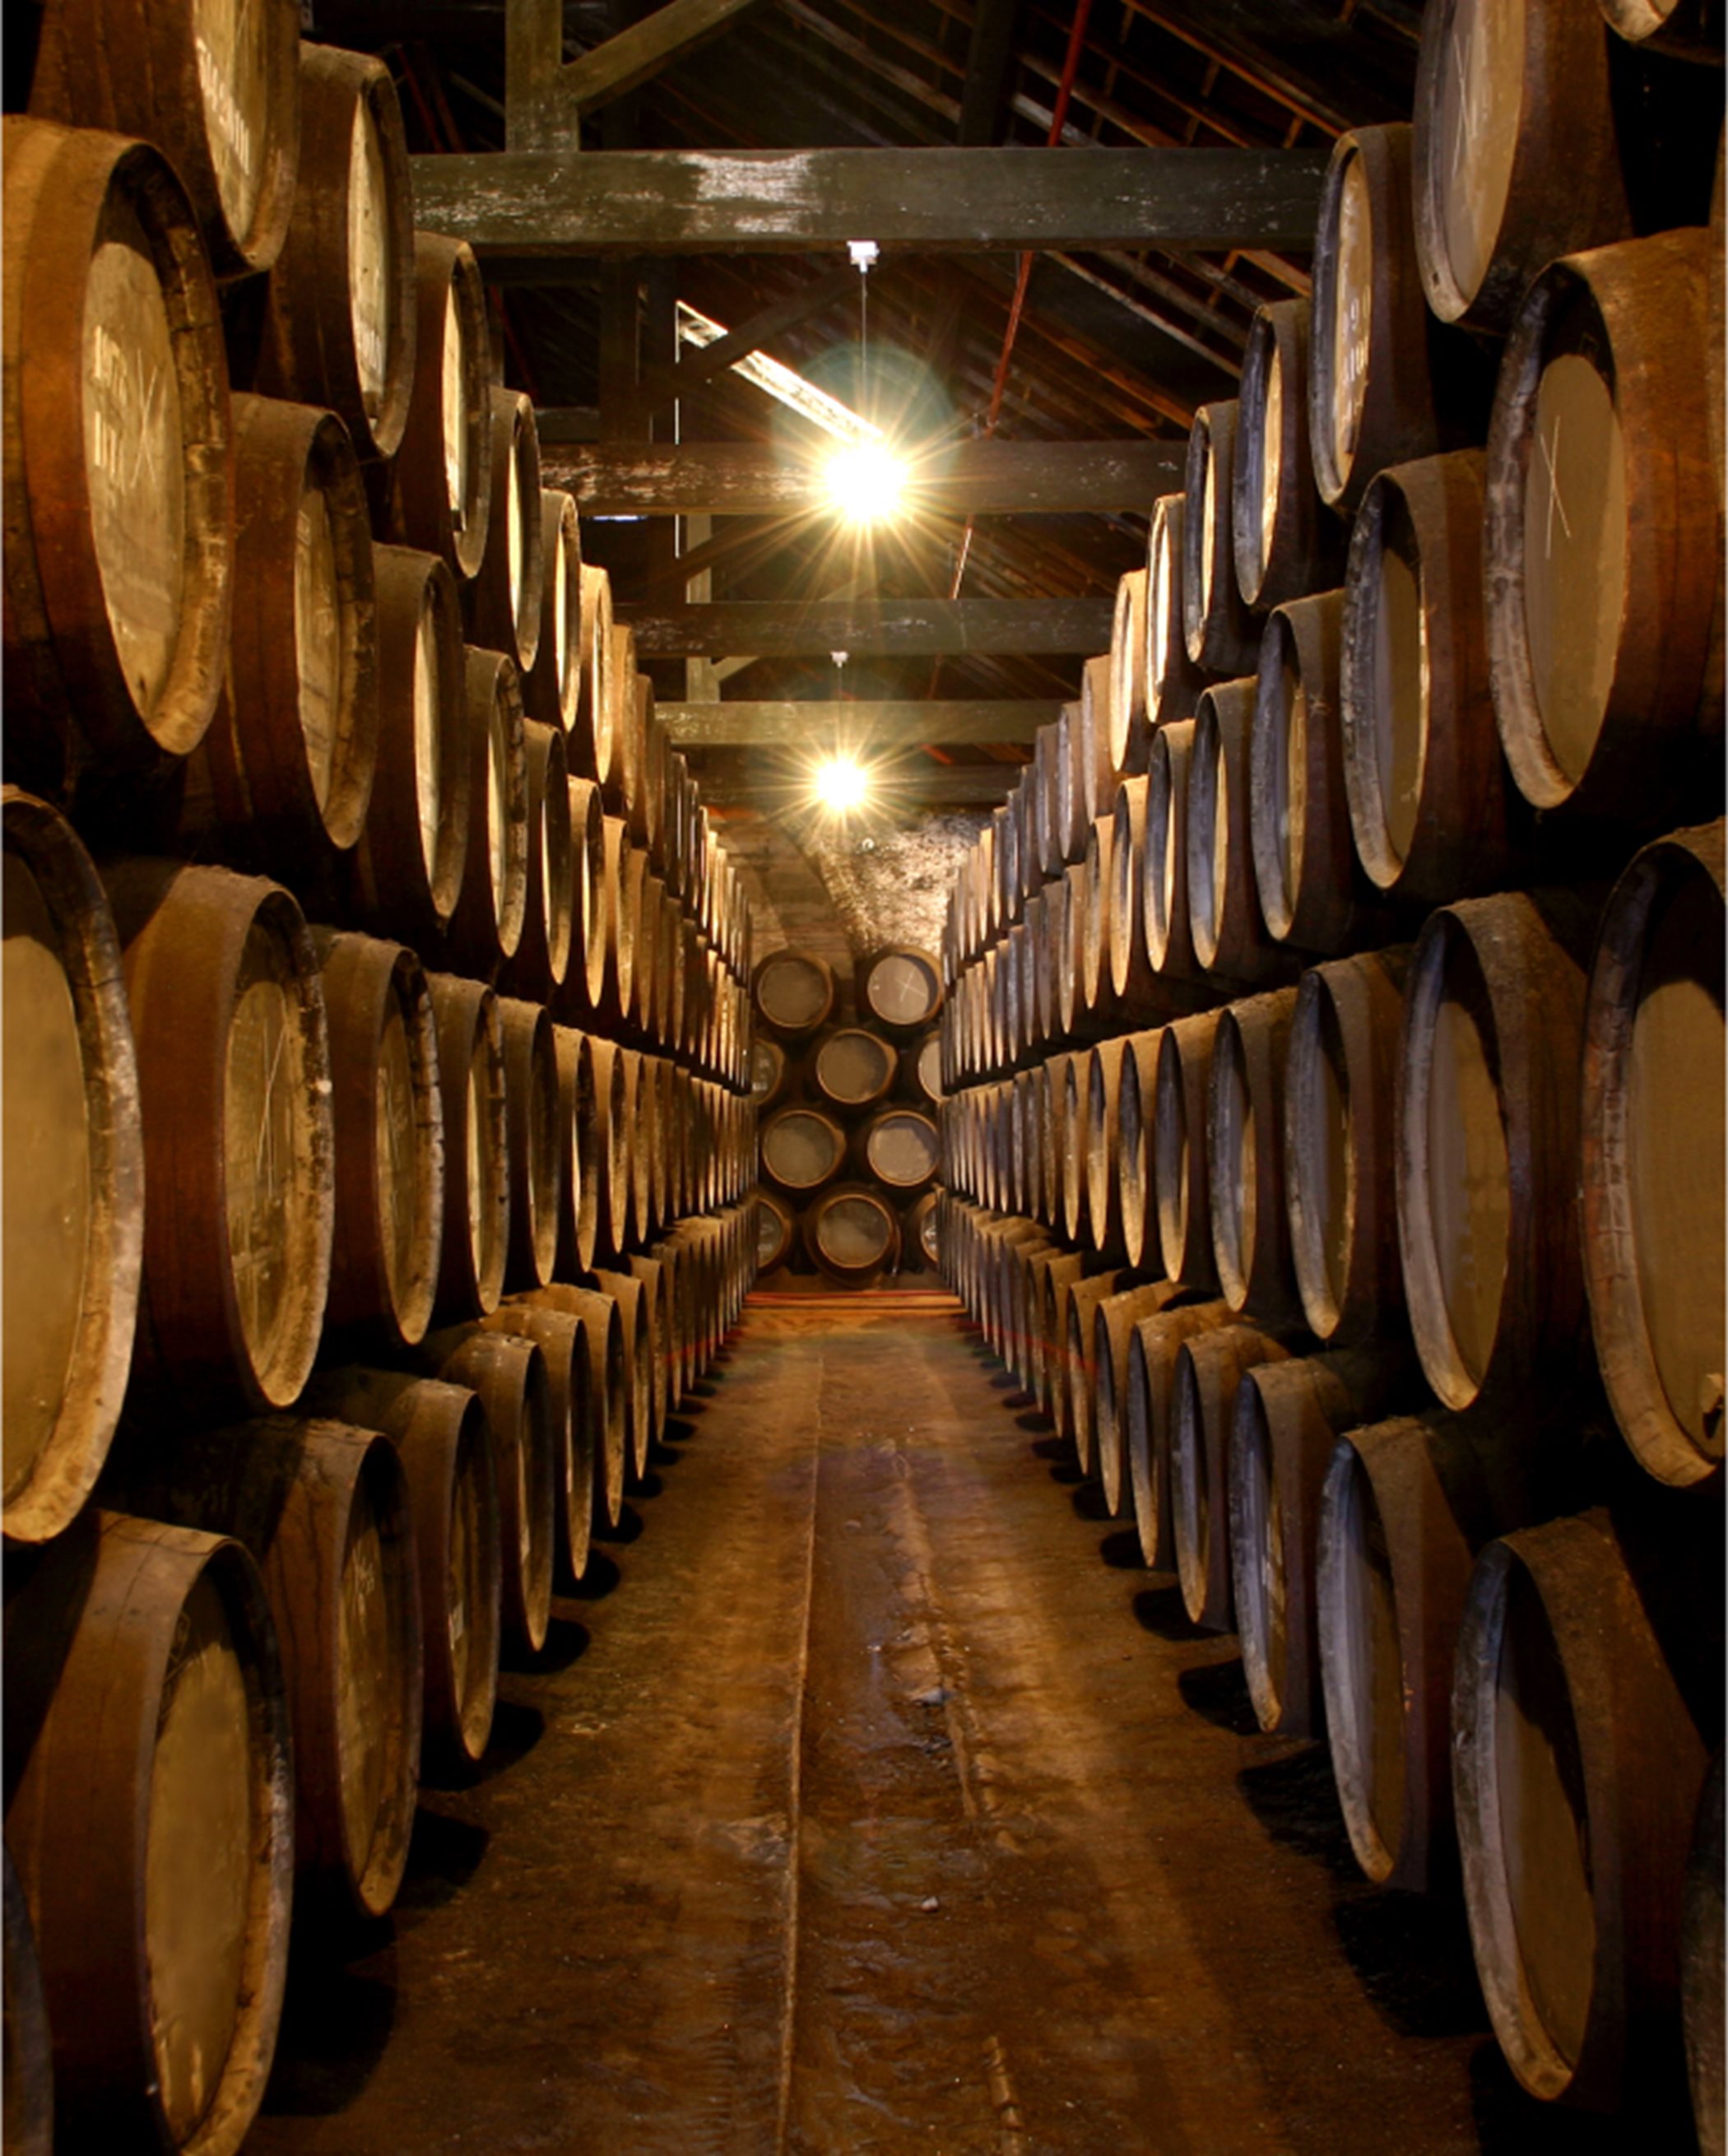 Barrel Room in a Winery